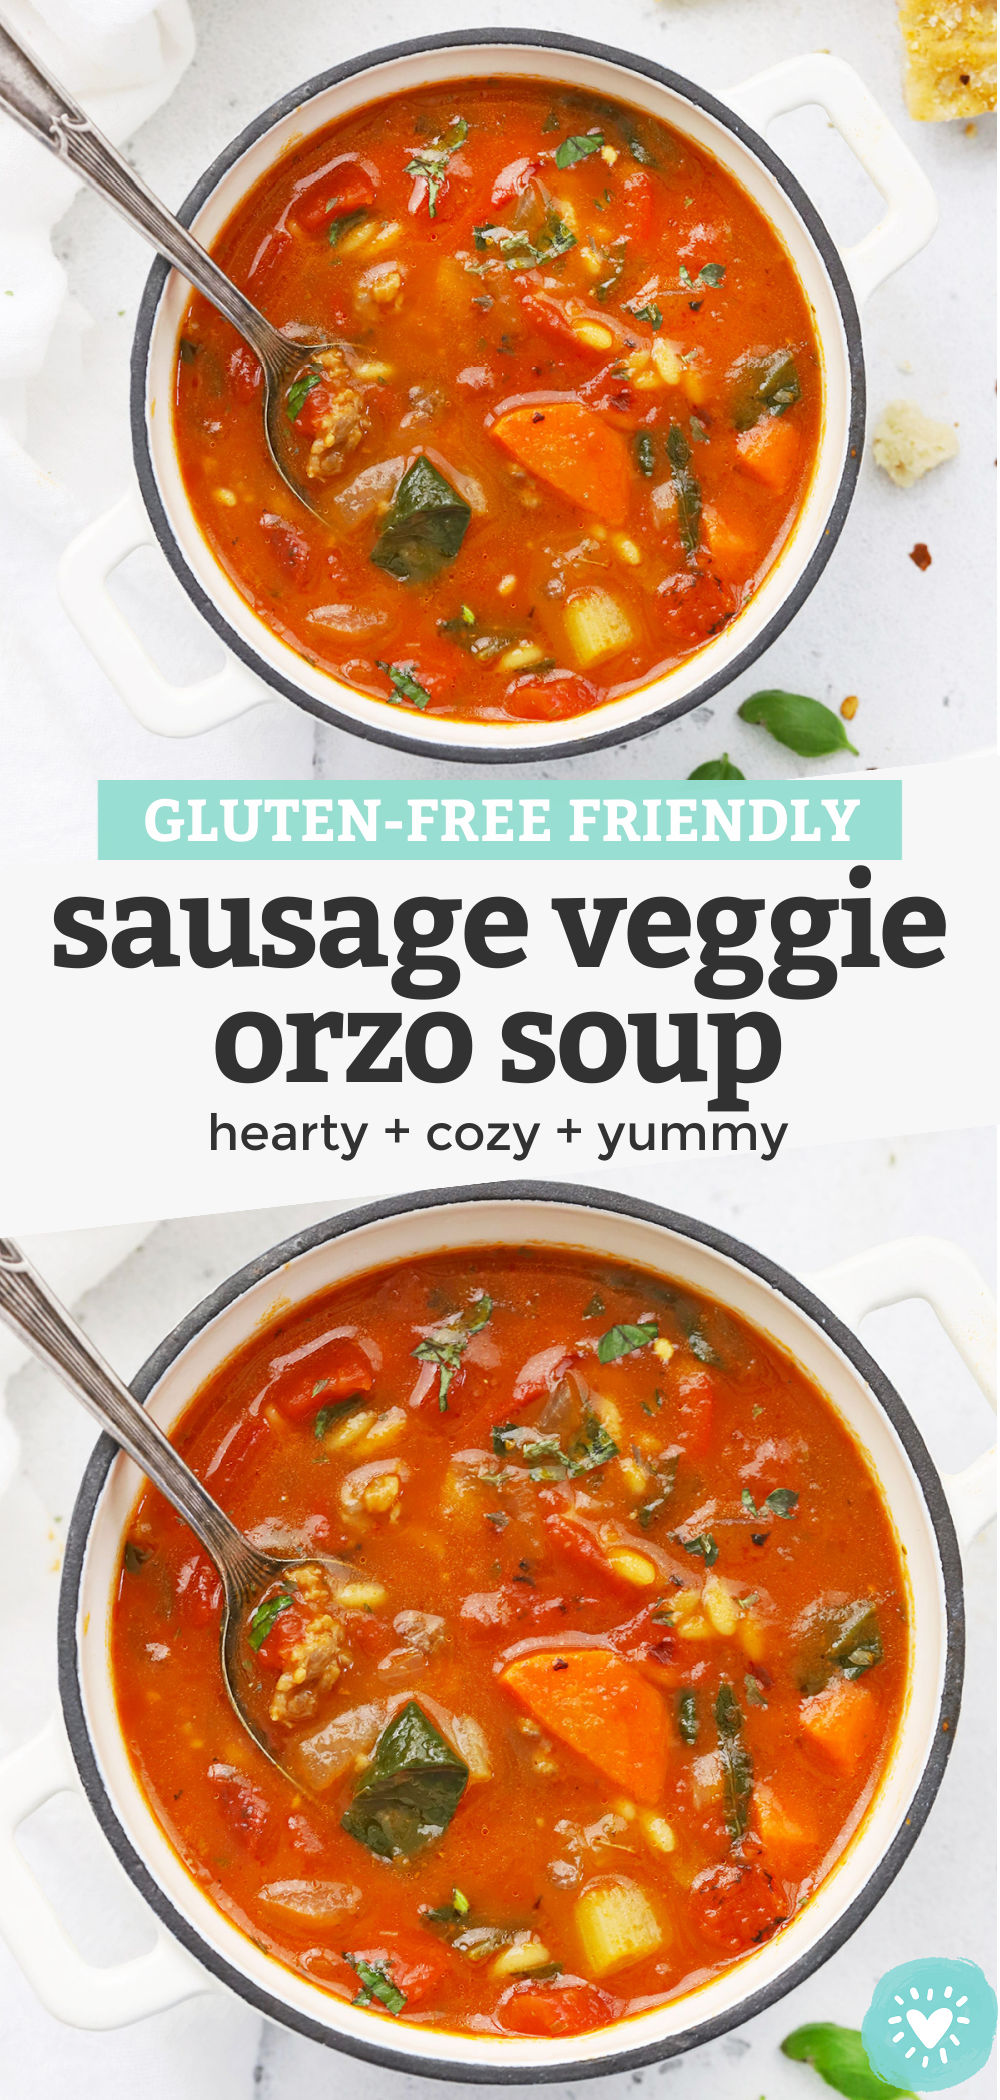 Sausage Orzo Soup - This Sausage Vegetable Orzo Soup is loaded with gorgeous Italian-inspired flavors and tender pasta. It's perfect for a cozy day! (Gluten-Free) // Orzo Veggie Soup // Sausage Veggie Orzo Soup Recipe // Gluten free Soup // Orzo recipe #orzo #soup #glutenfree